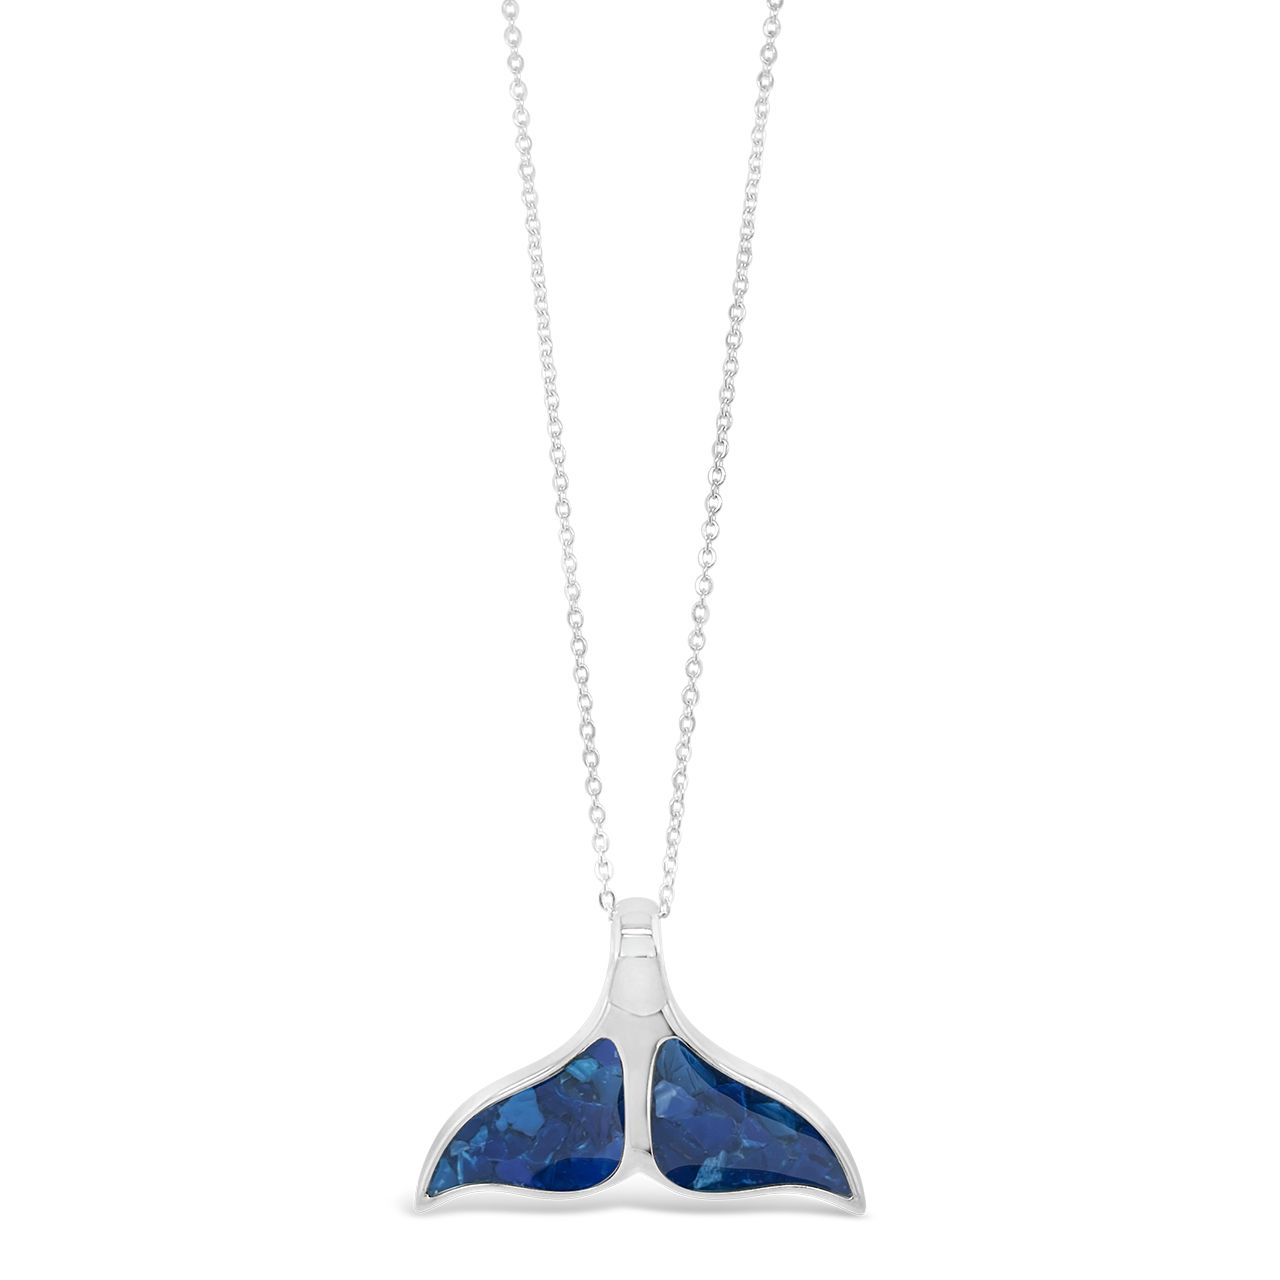 Product shot of the Whale Tail Necklace in Bali Blue by Dune x 4ocean using recycled plastic.